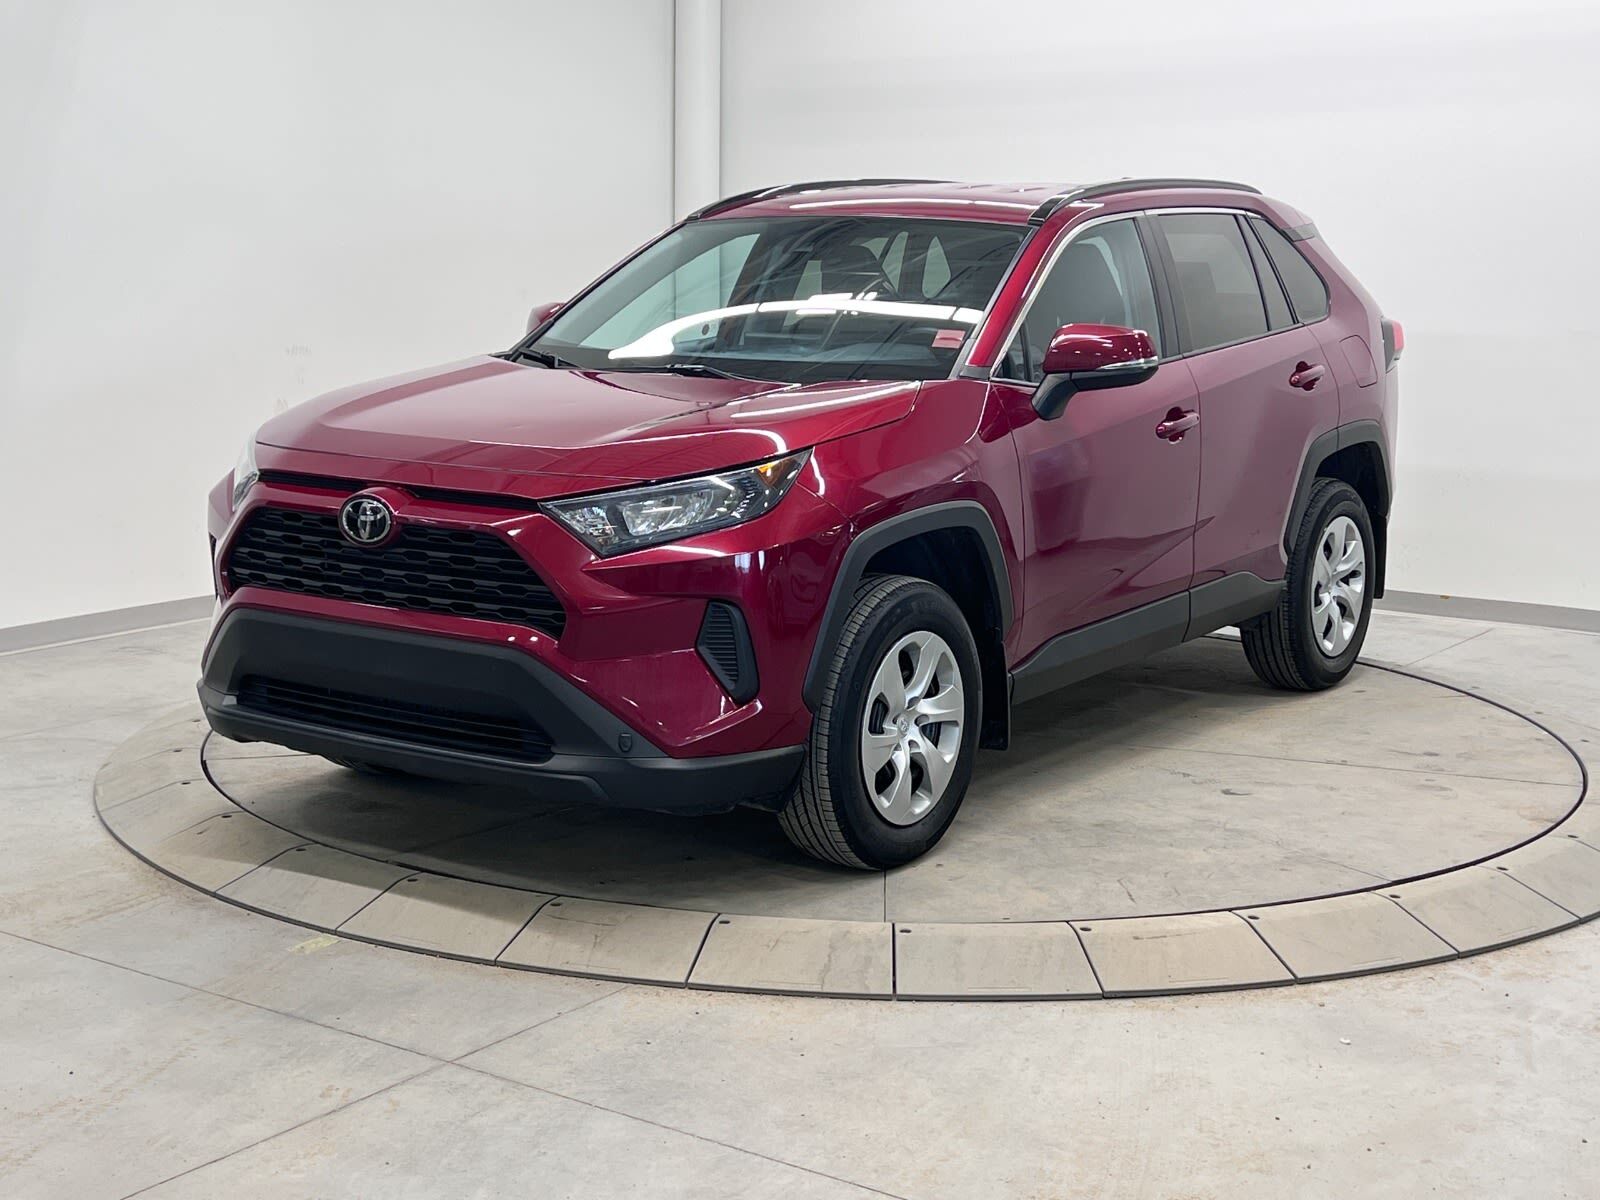 2020 Toyota RAV4 LE AWD - MARCH MADNESS!